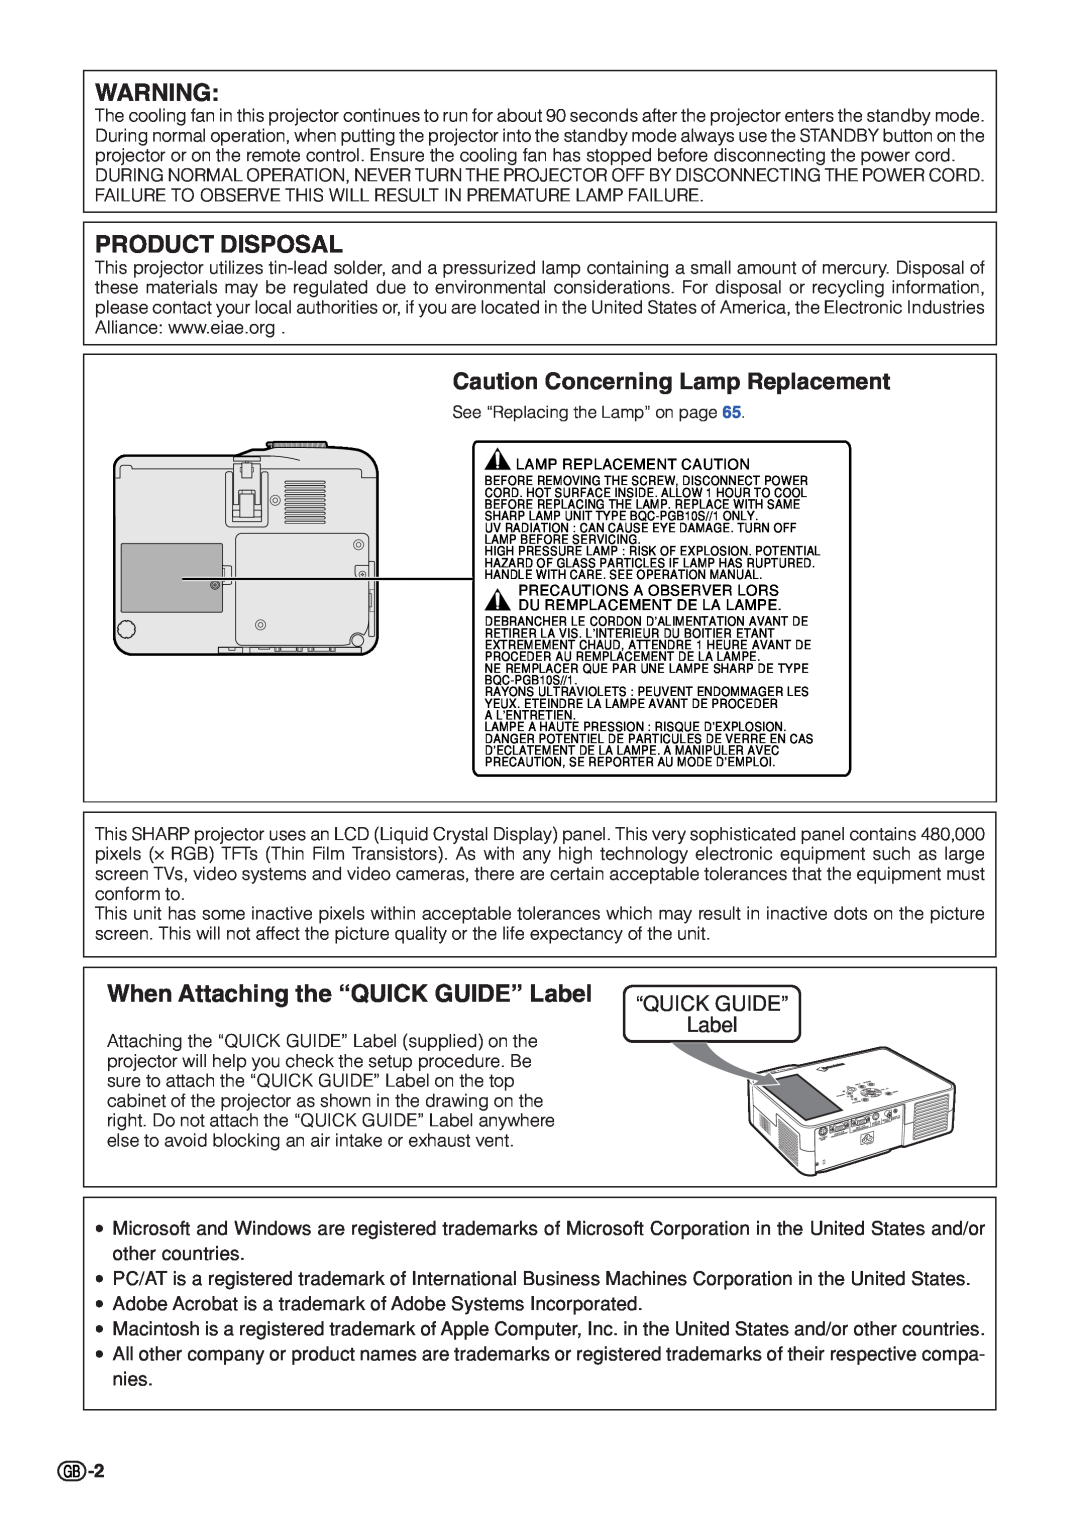 Sharp PG-B10S Product Disposal, Caution Concerning Lamp Replacement, When Attaching the “QUICK GUIDE” Label 